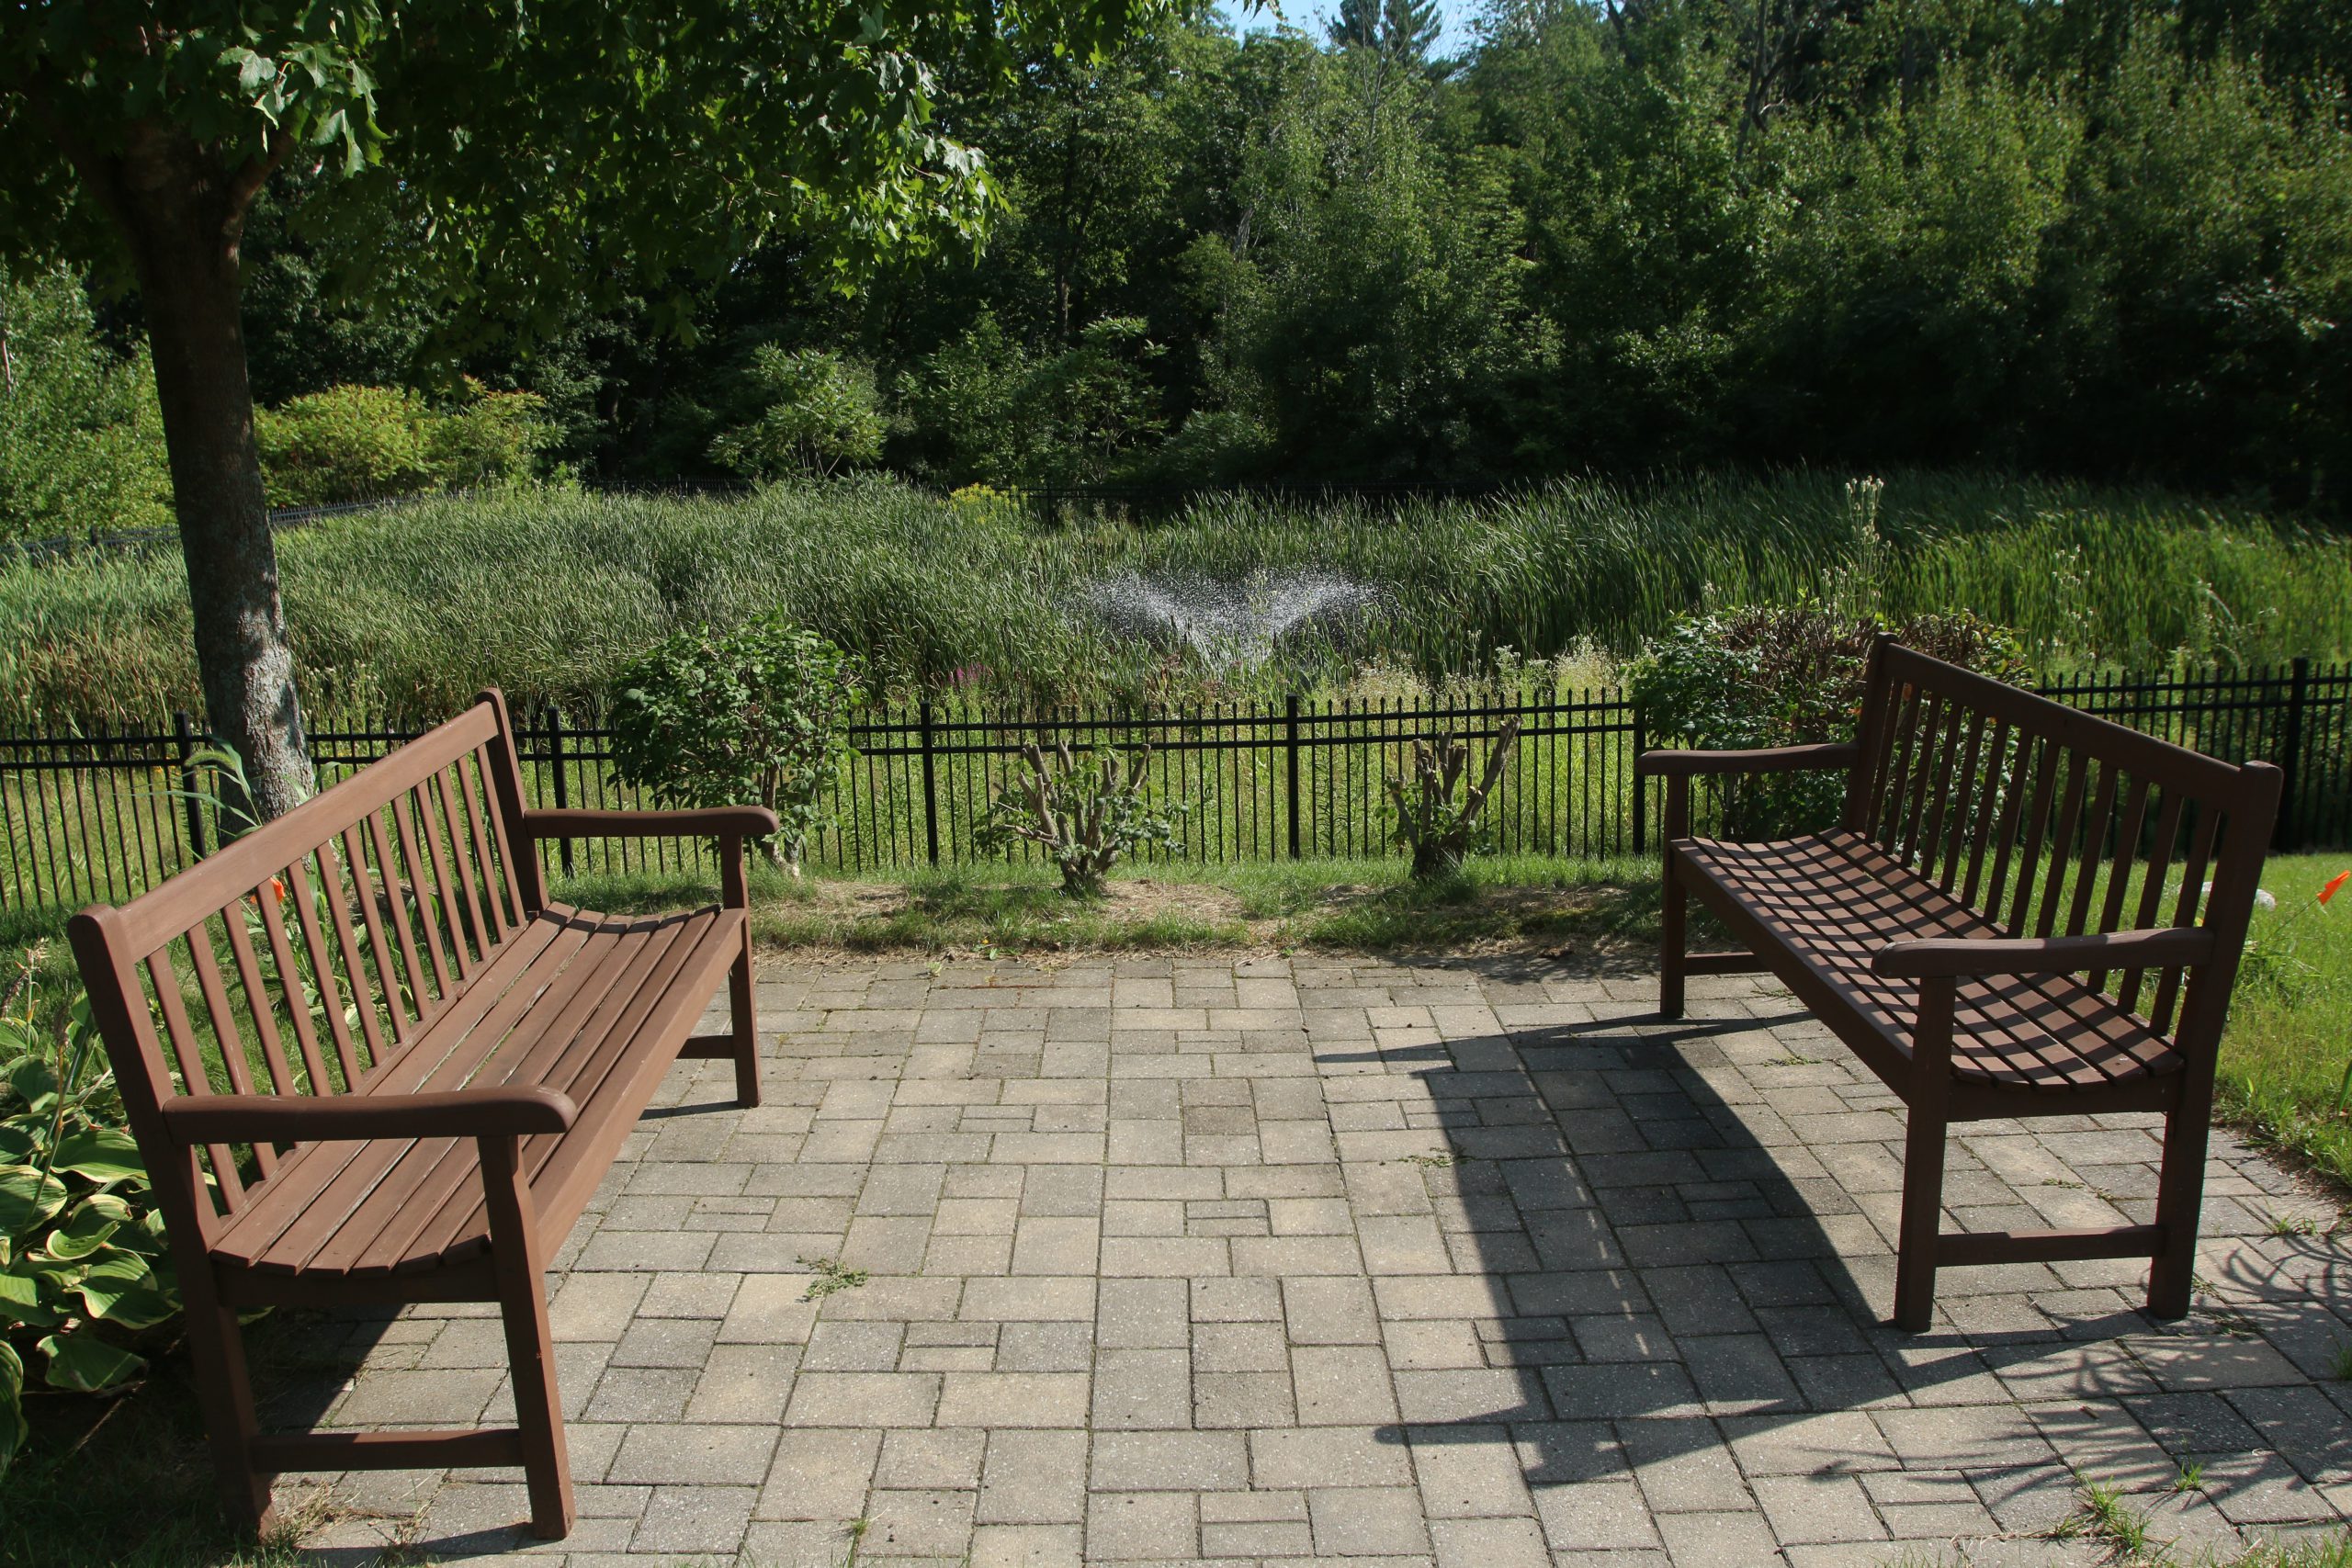 The Terrace at Beverwyck outdoor benches